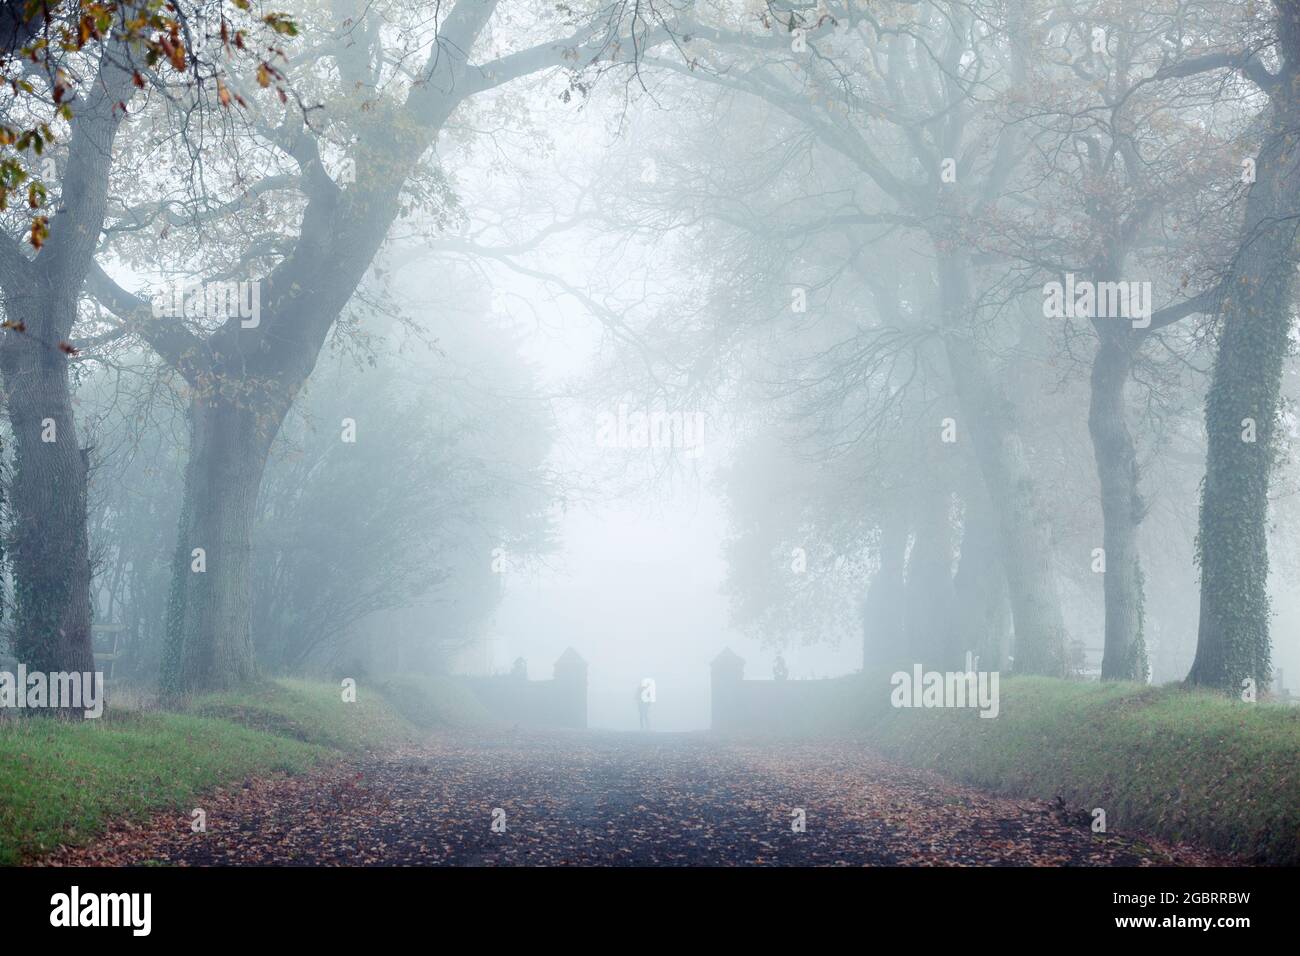 Old trees Avenue in the fog and a silhouette on the way. creepy scene Stock Photo